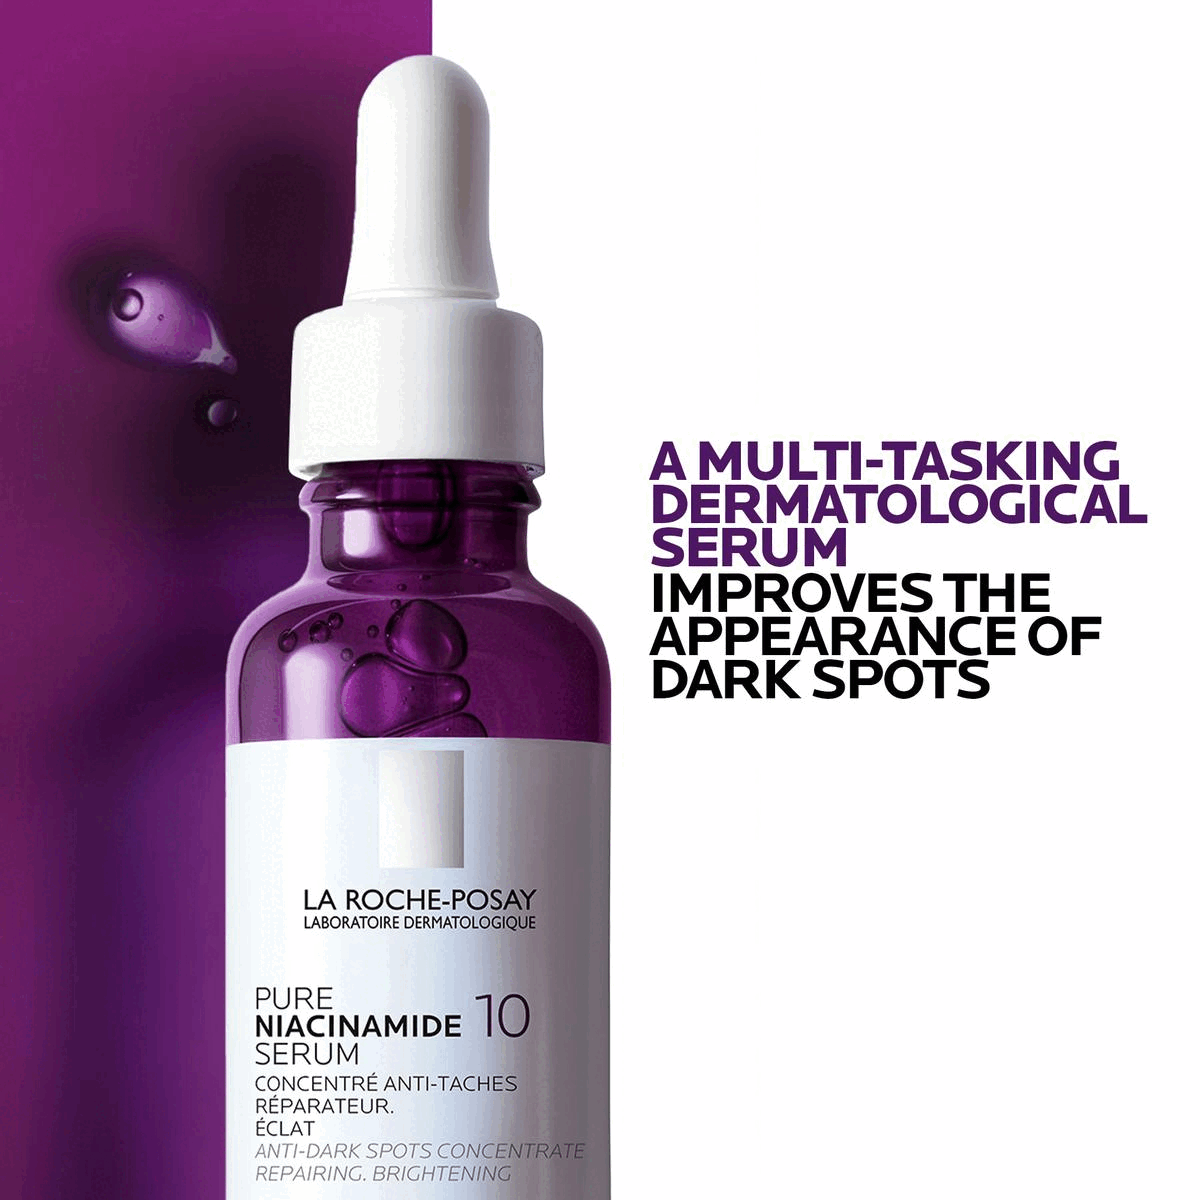 Six images transitioning into each other in an endless loop. Image 1: A multi-tasking dermatological serum improves the appearance of dark spots. Image 2: Niacinamide targets dark spots. Hyaluronic acid retains skin's natural moisture. Image 3: Specifically formulated for sensitive skin. Image 4: 